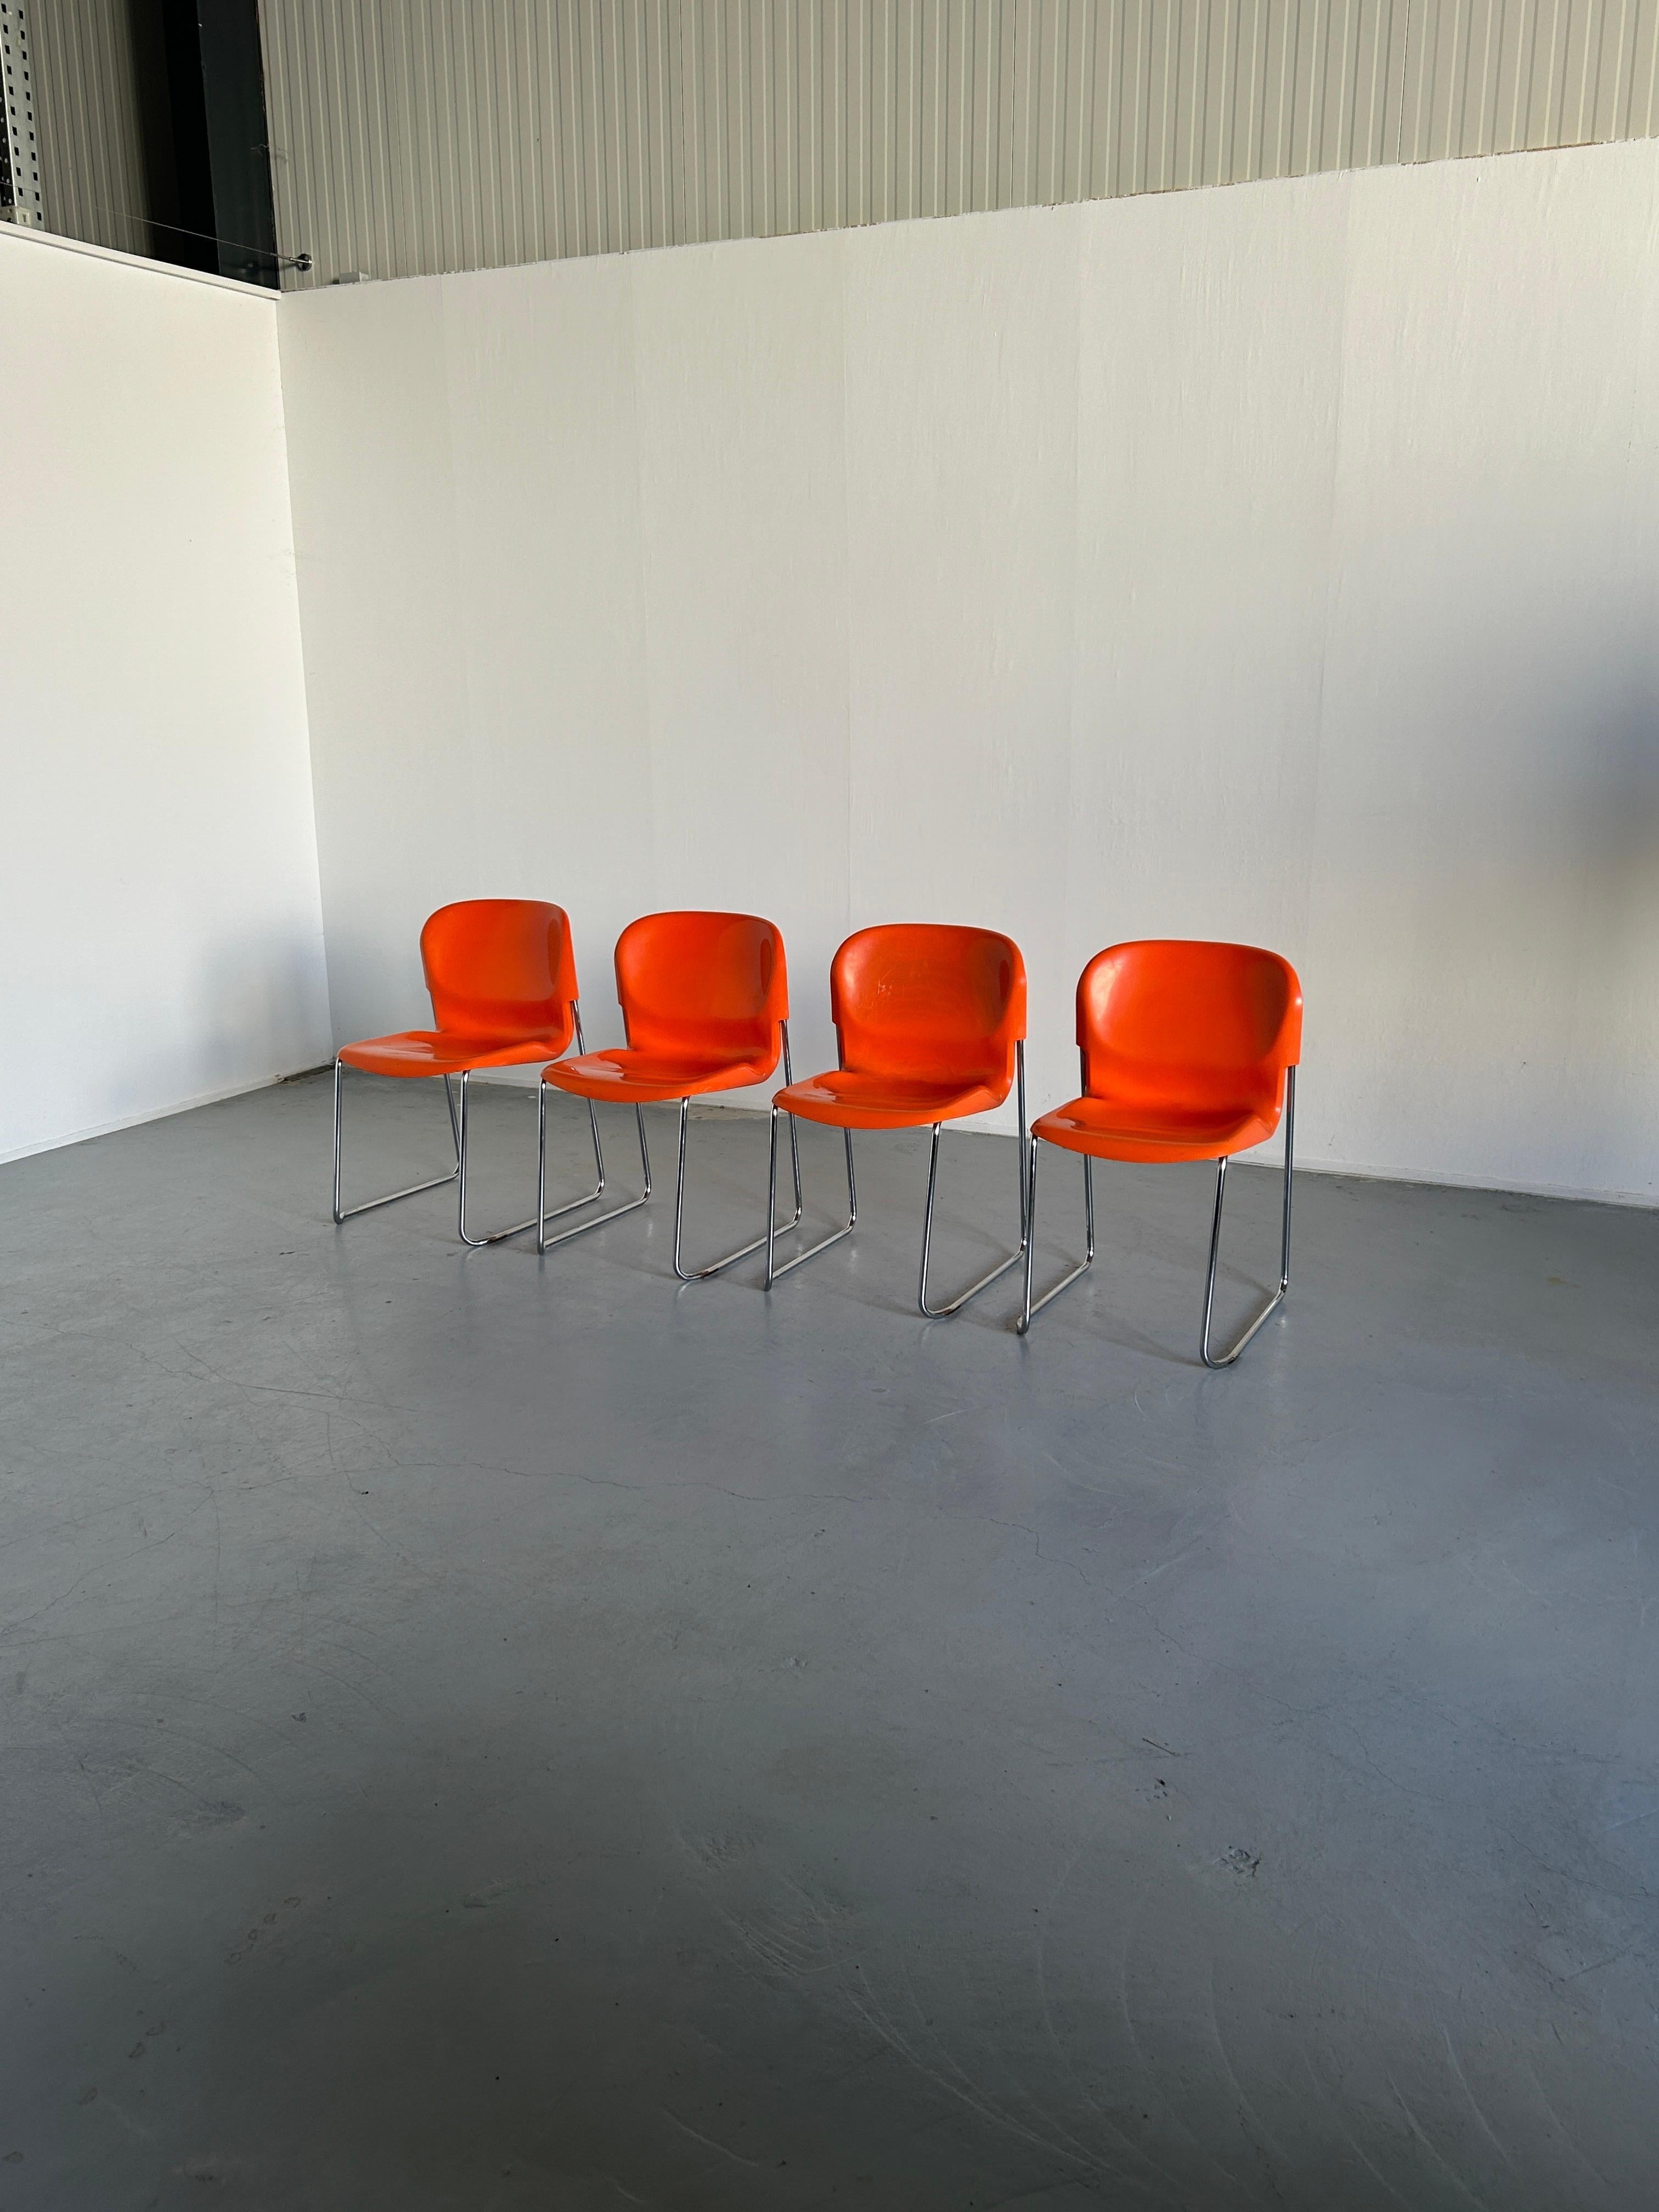 Set of four brightly colored pair of SM 400 Swing chairs designed in the 1970s by Gerd Lange for Drabert, a West German furniture maker. Orange molded plastic seats sit on a chrome frame that allows for easy stacking for storage.
Produced in West